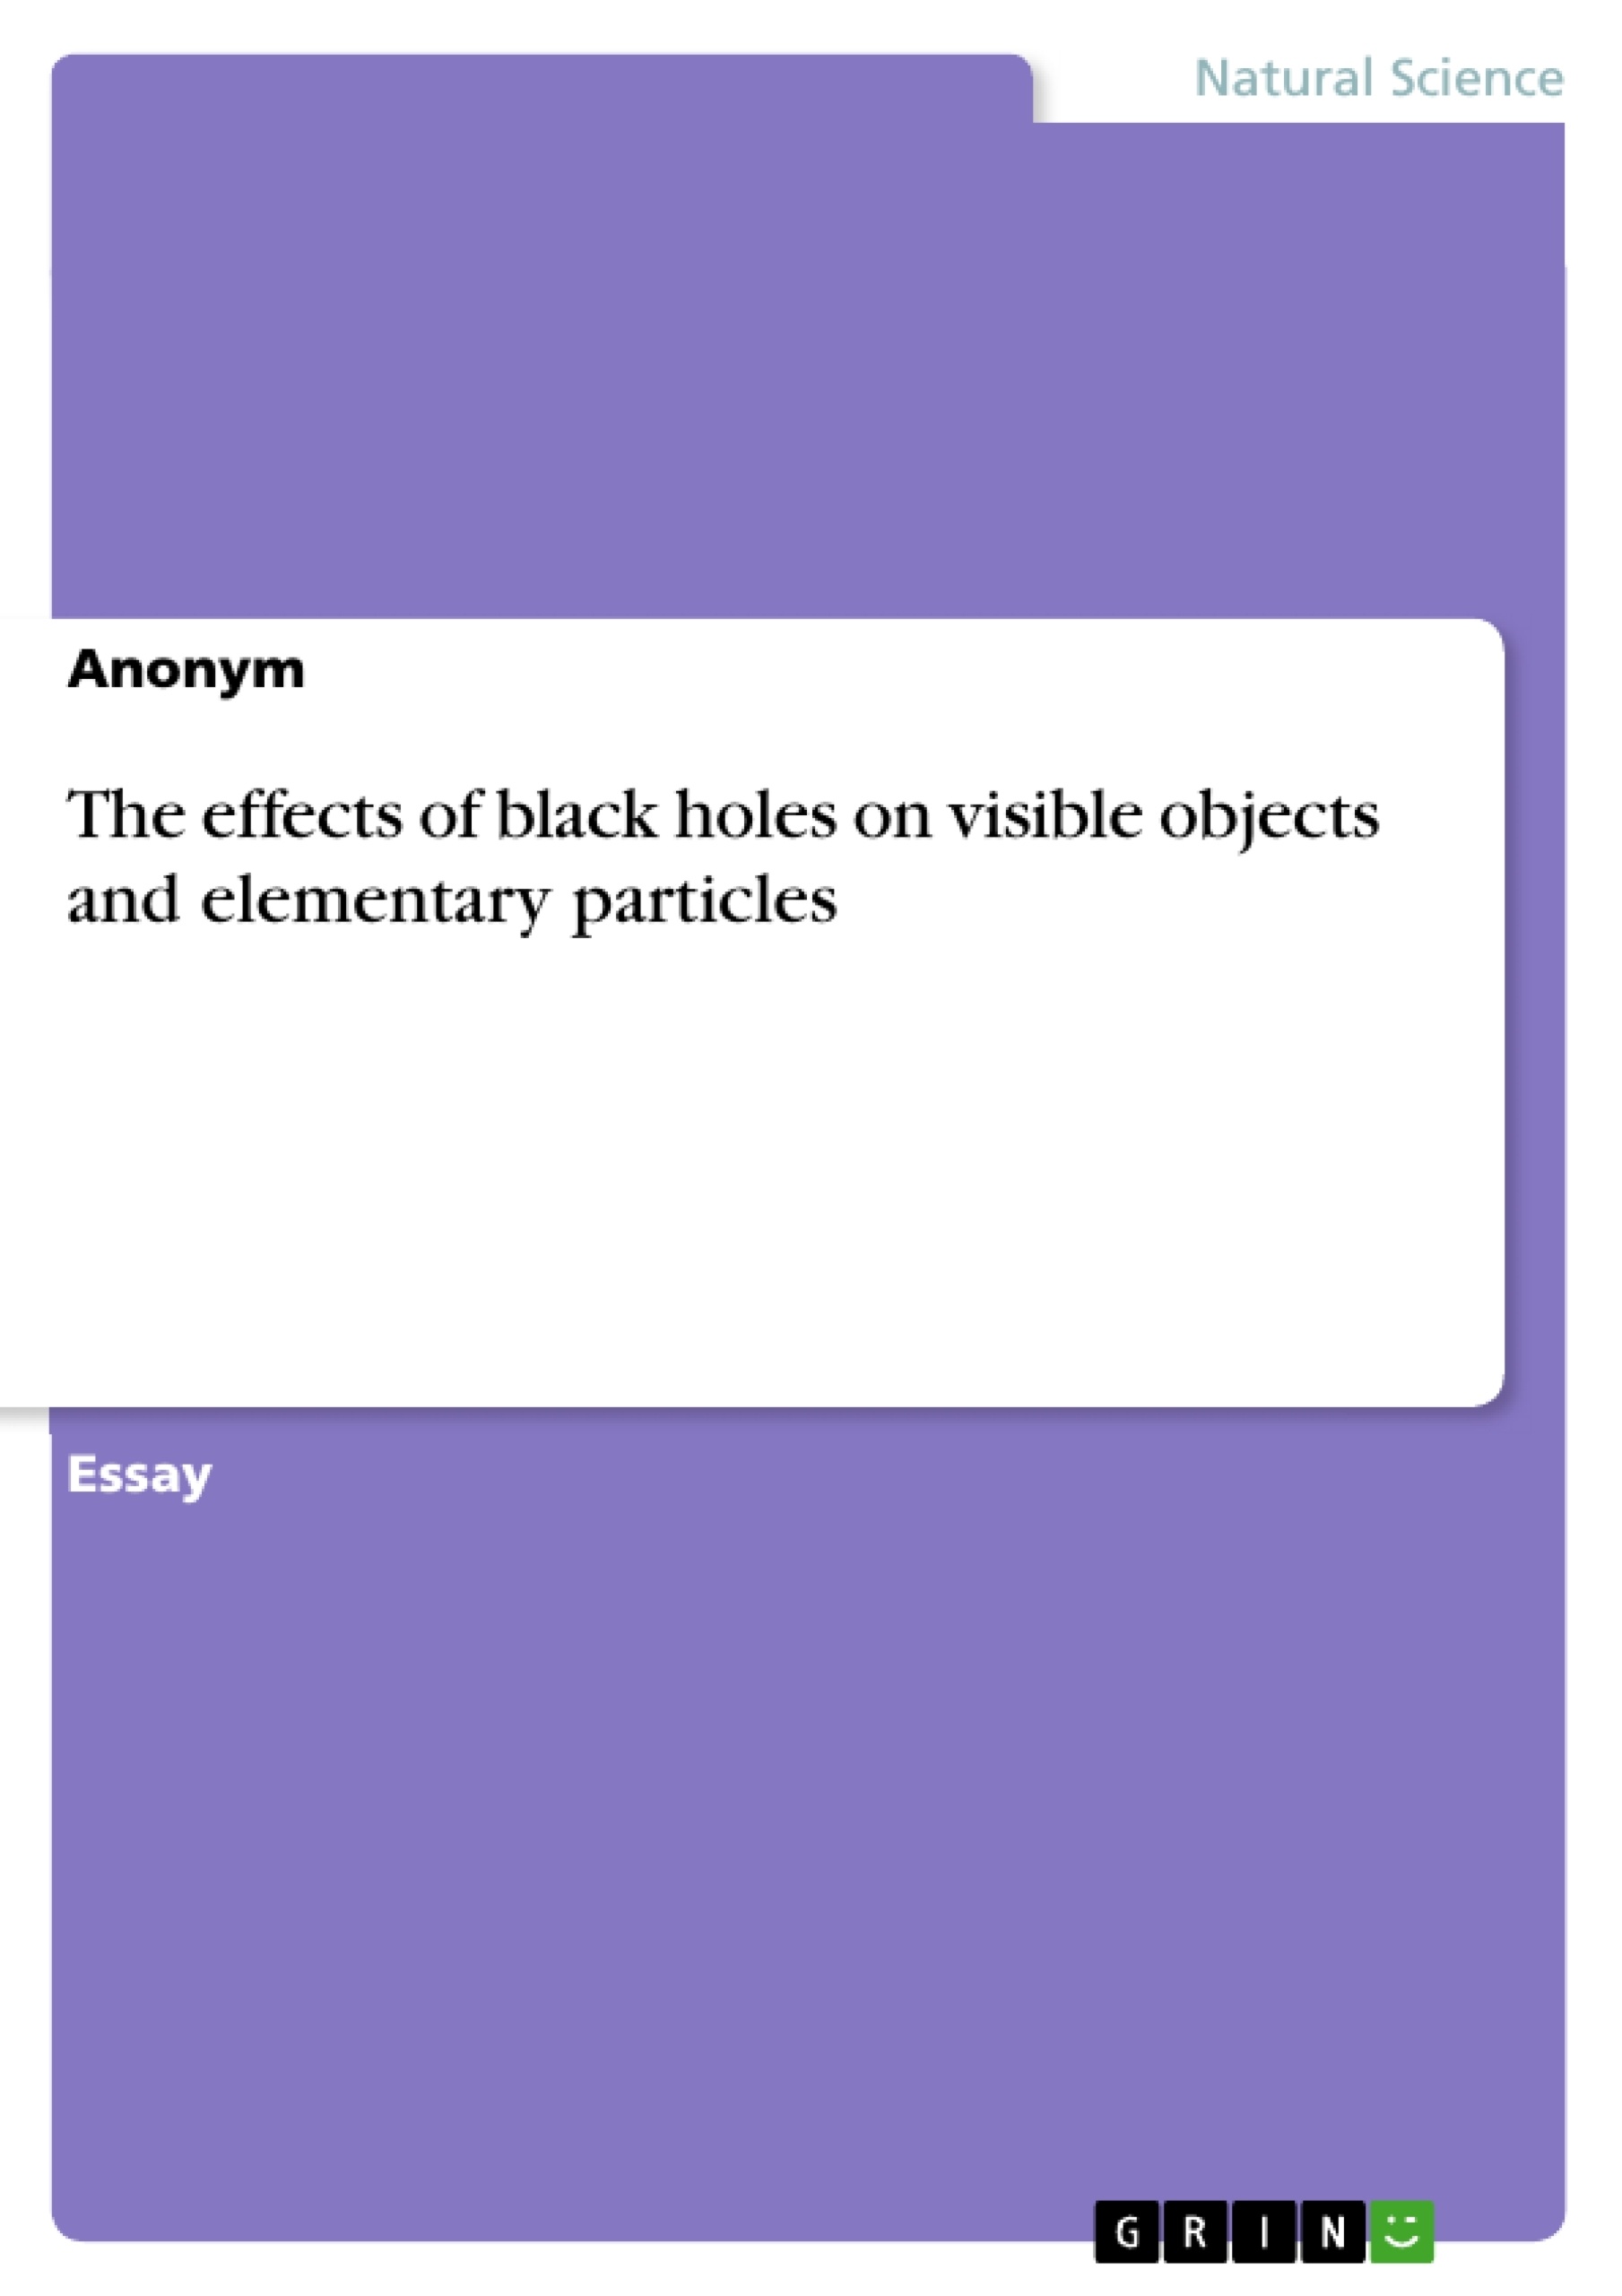 Title: The effects of black holes on visible objects and elementary particles